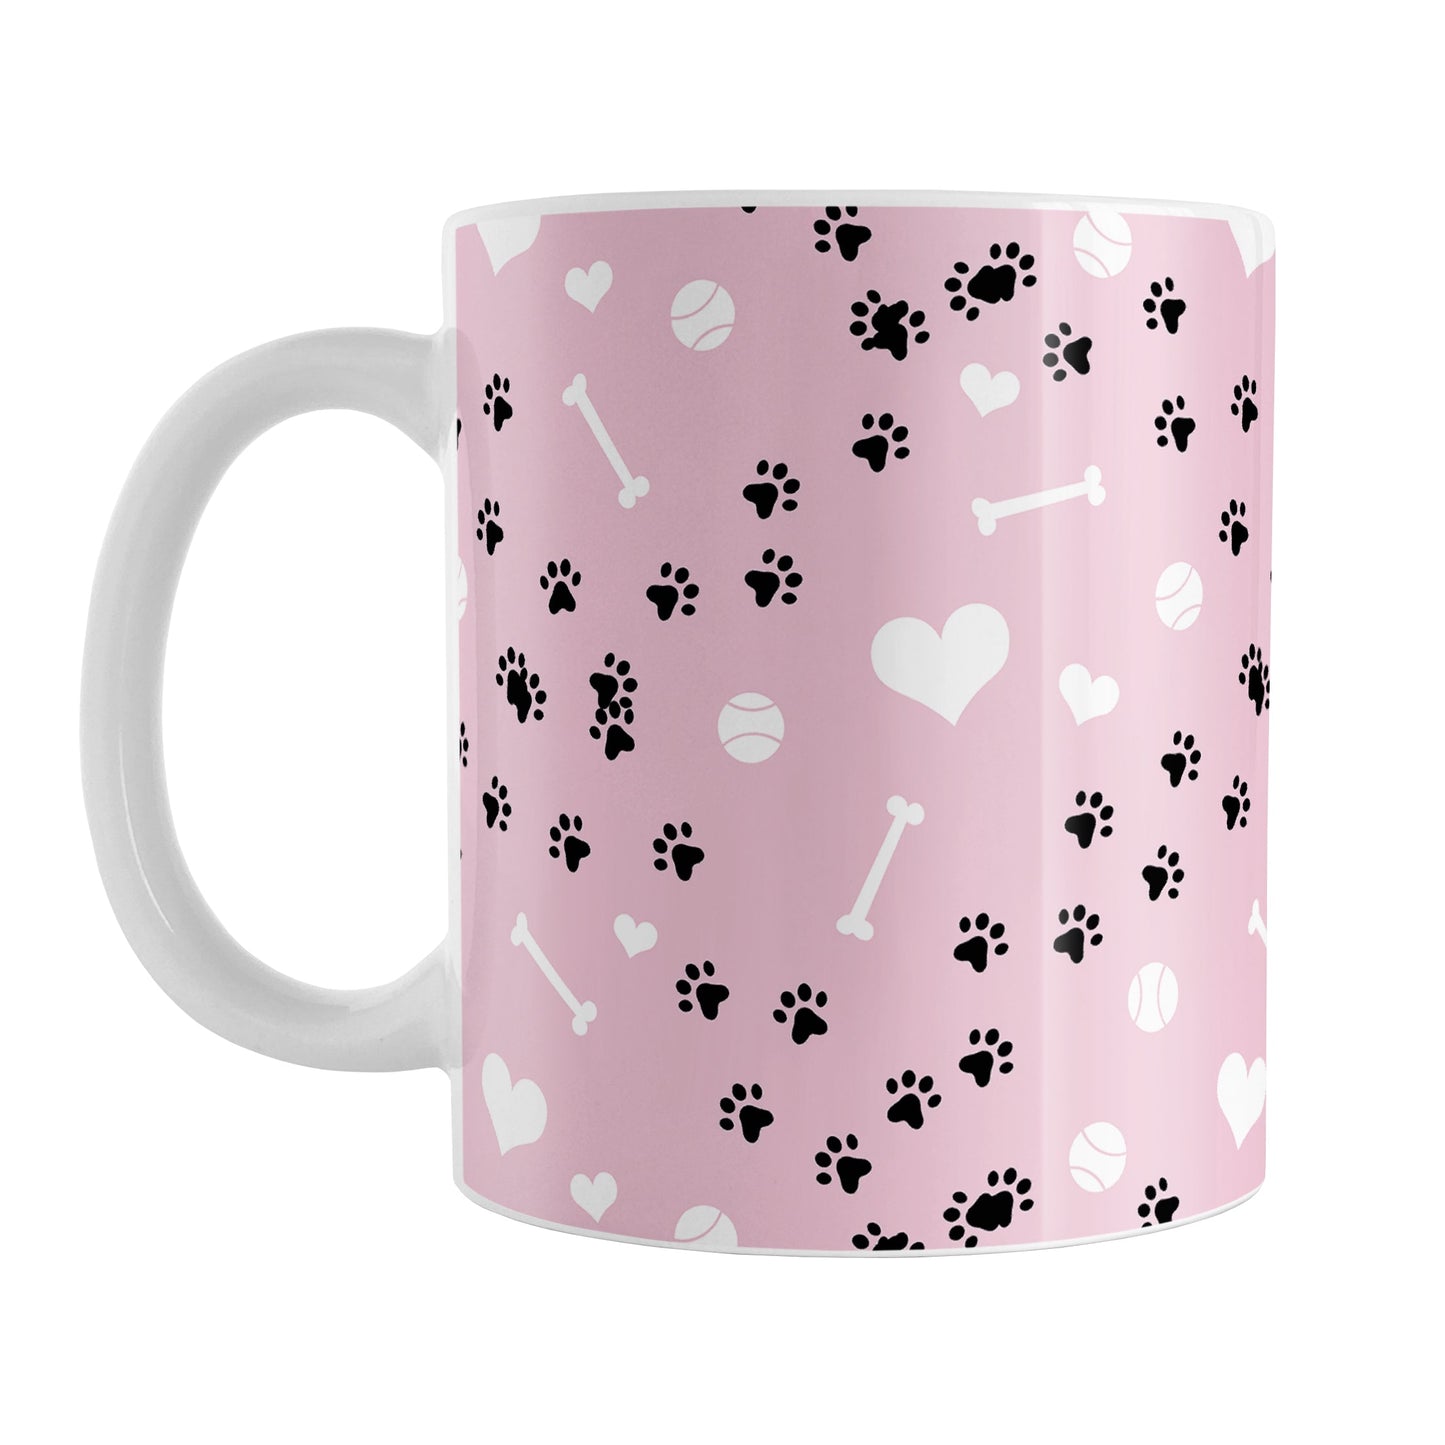 Puppy Run Pink Dog Mug (11oz) at Amy's Coffee Mugs. A ceramic coffee mug designed with a pattern of chaotic tracks of puppy paw prints running around the mug with white dog bones, balls, and hearts over a light pink background. This mug is perfect for people who love the chaotic play of puppies, love dogs, and like pink mugs. 